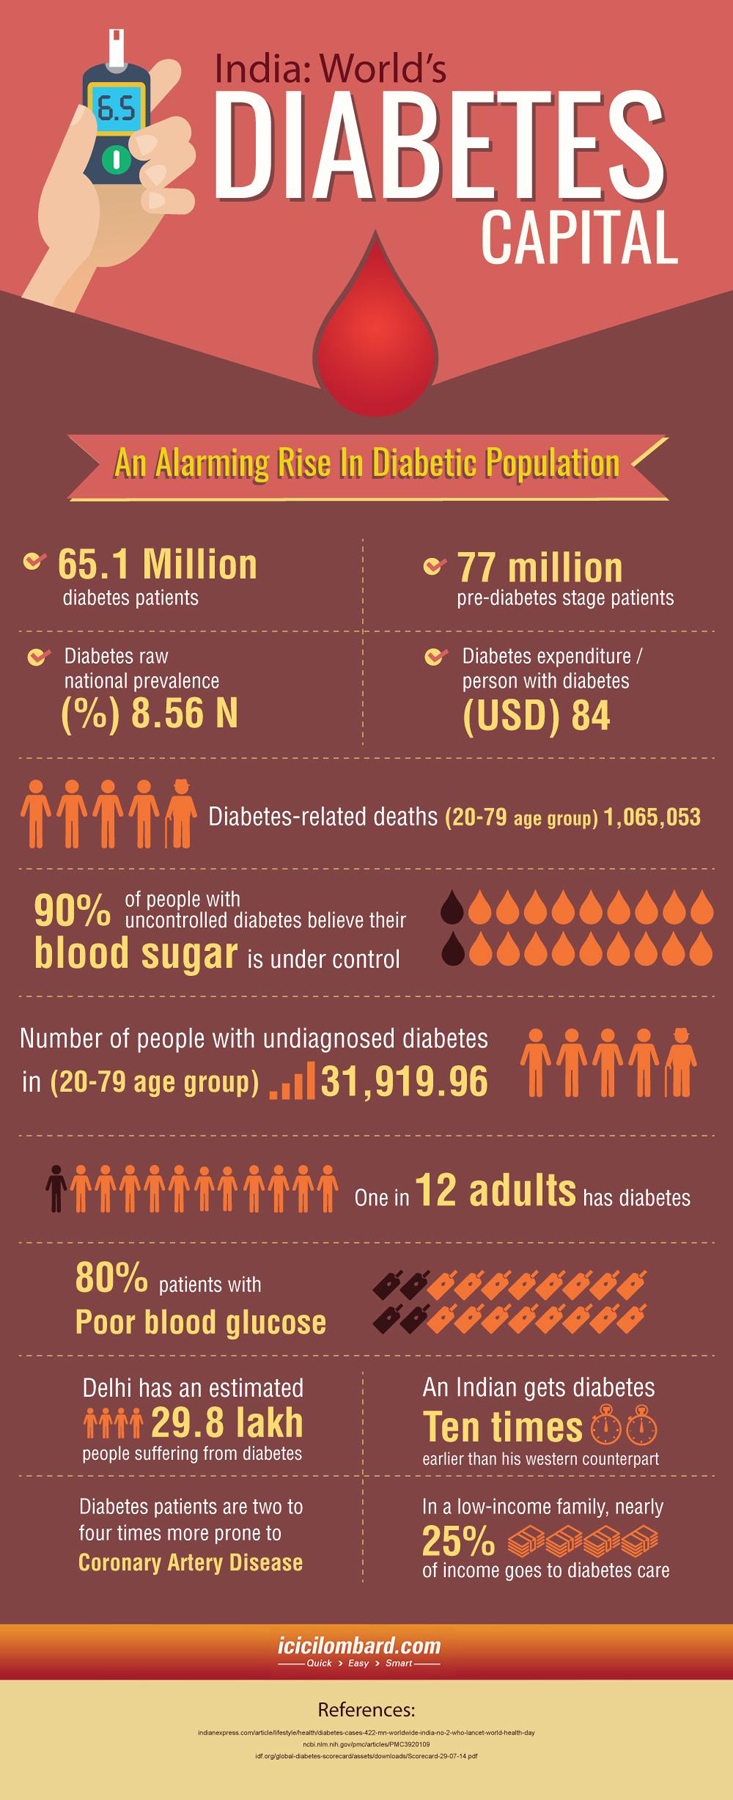 An Alarming Rise in Diabetic Population, India among Top 3 countries